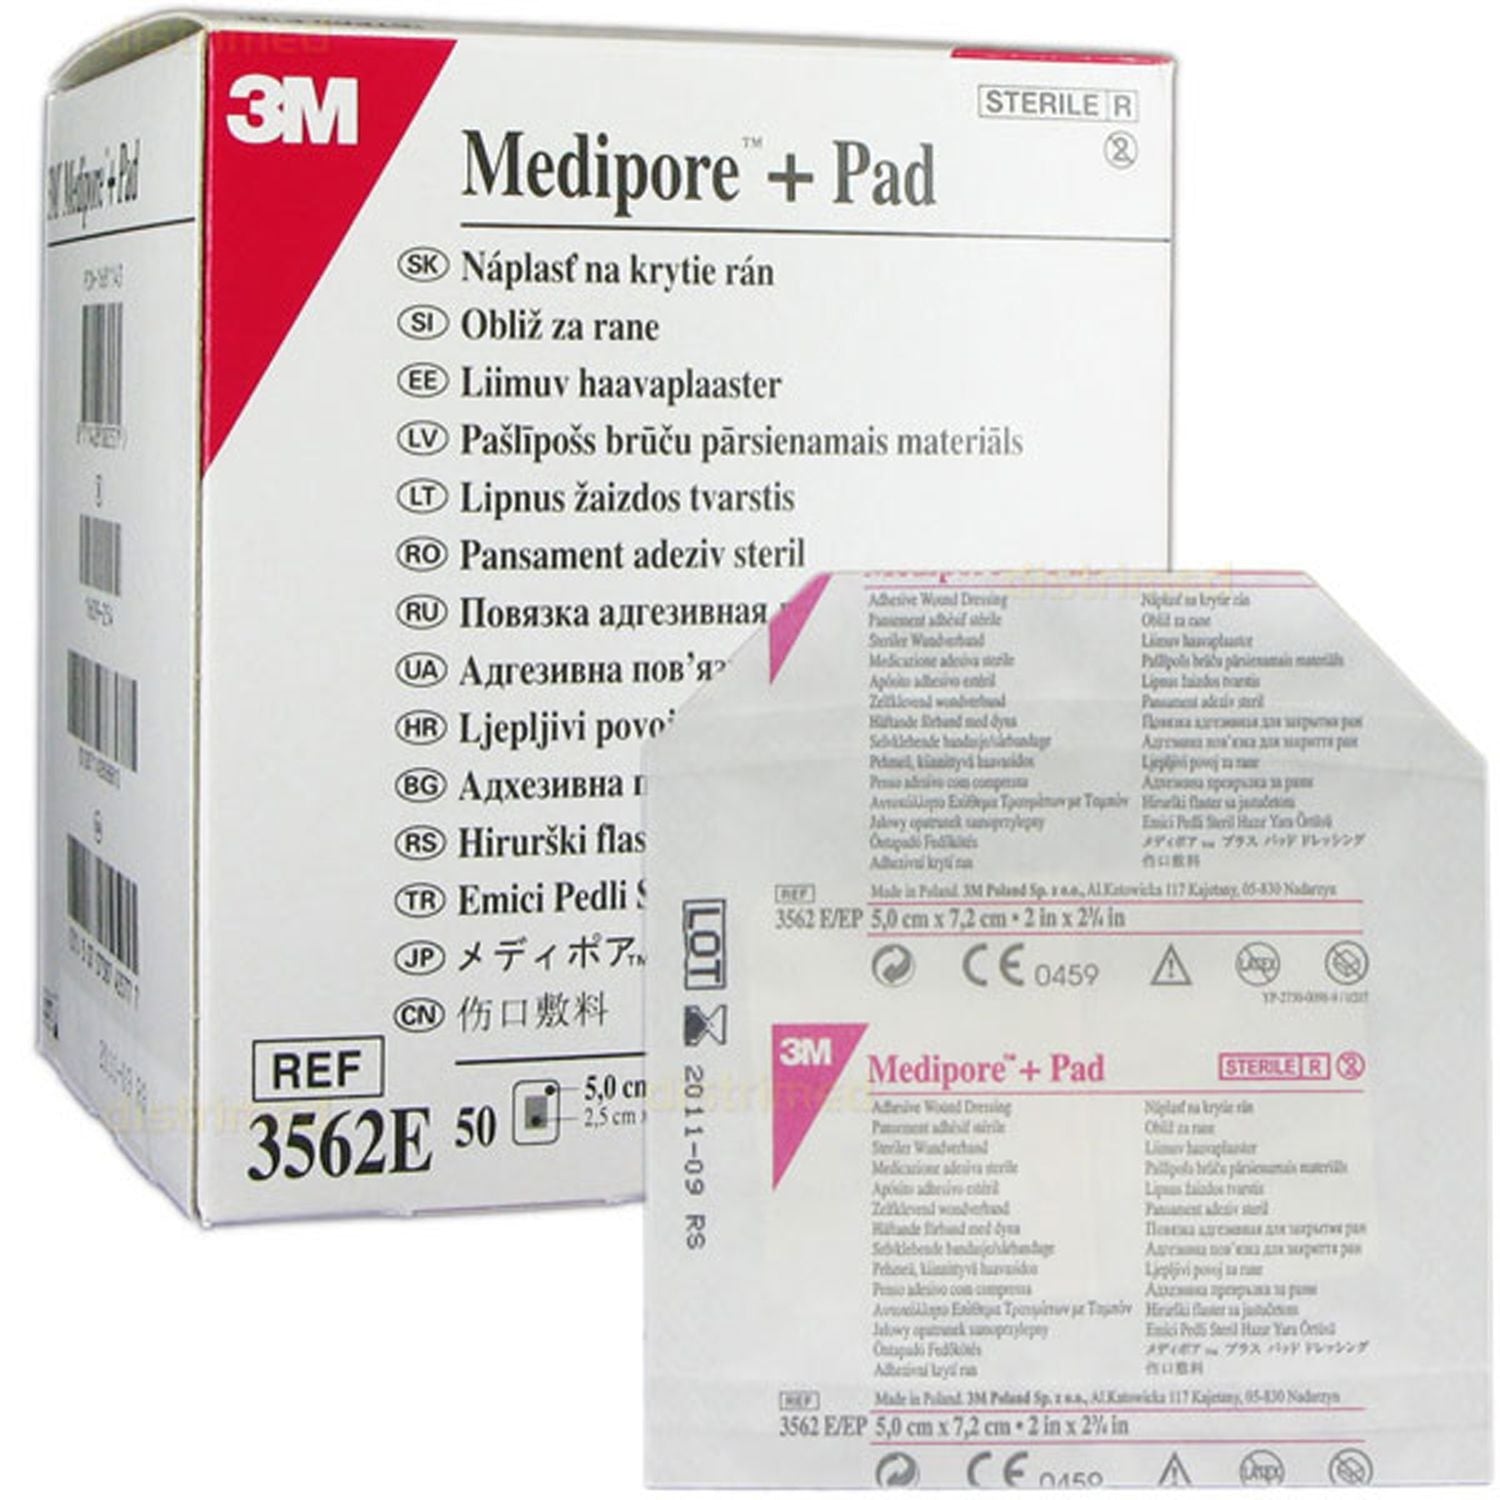 3M Medipore + Pad Adhesive Wound Dressing | 10 x 35cm | Pack of 25